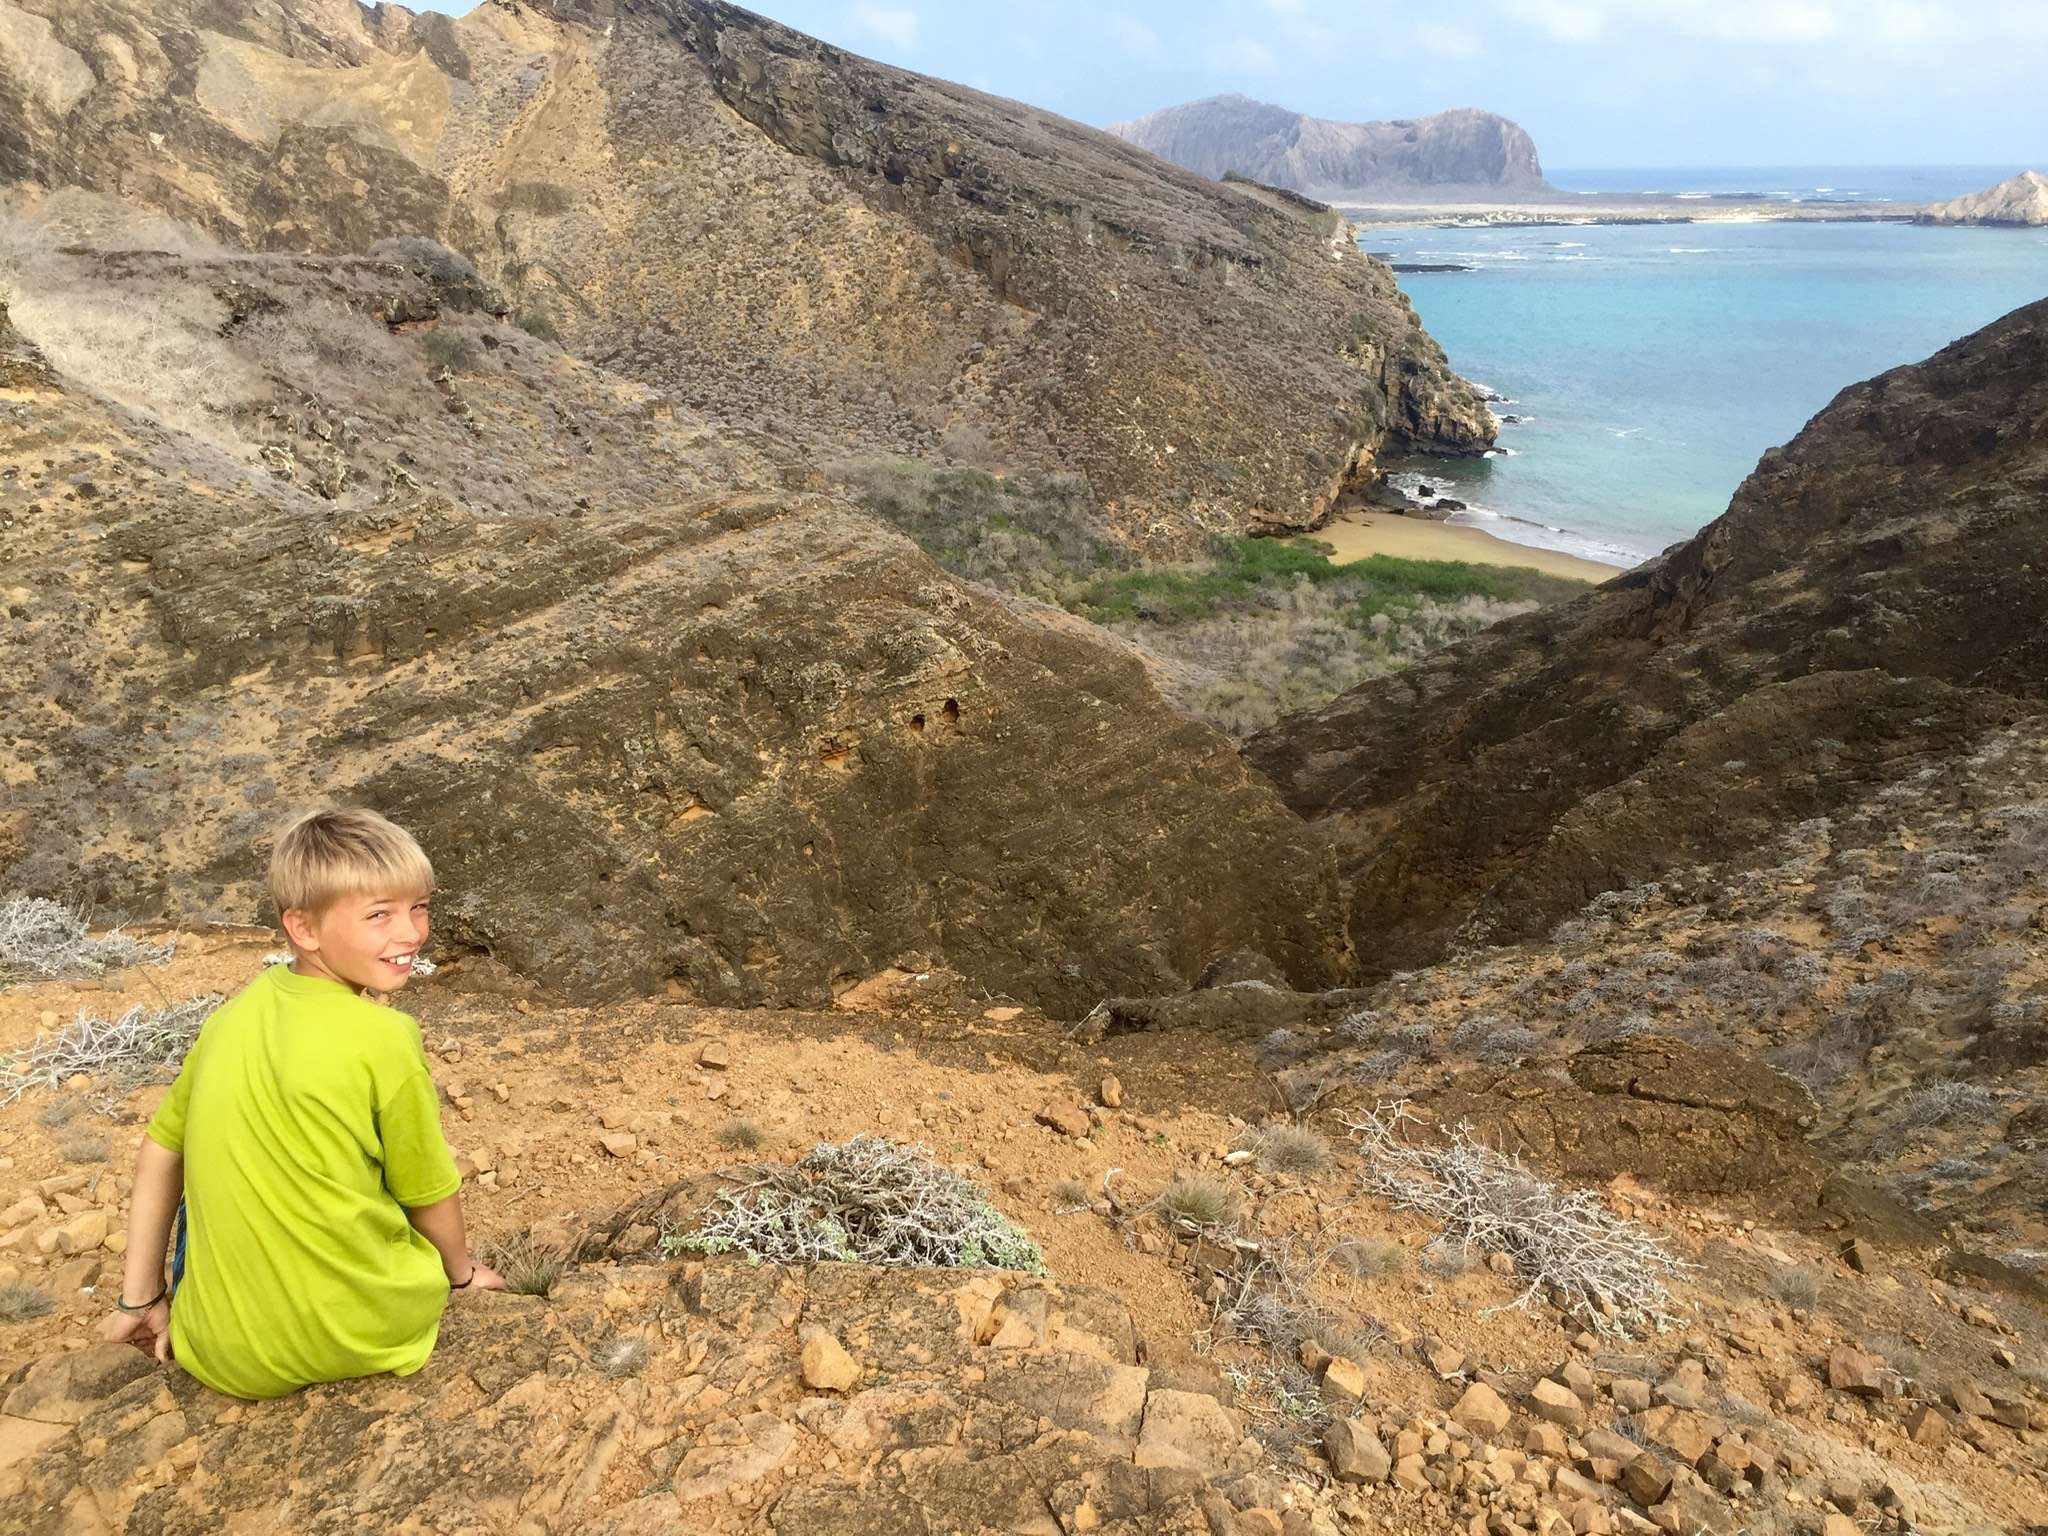 Looking out at the ocean on a Family Galapagos Adventure.